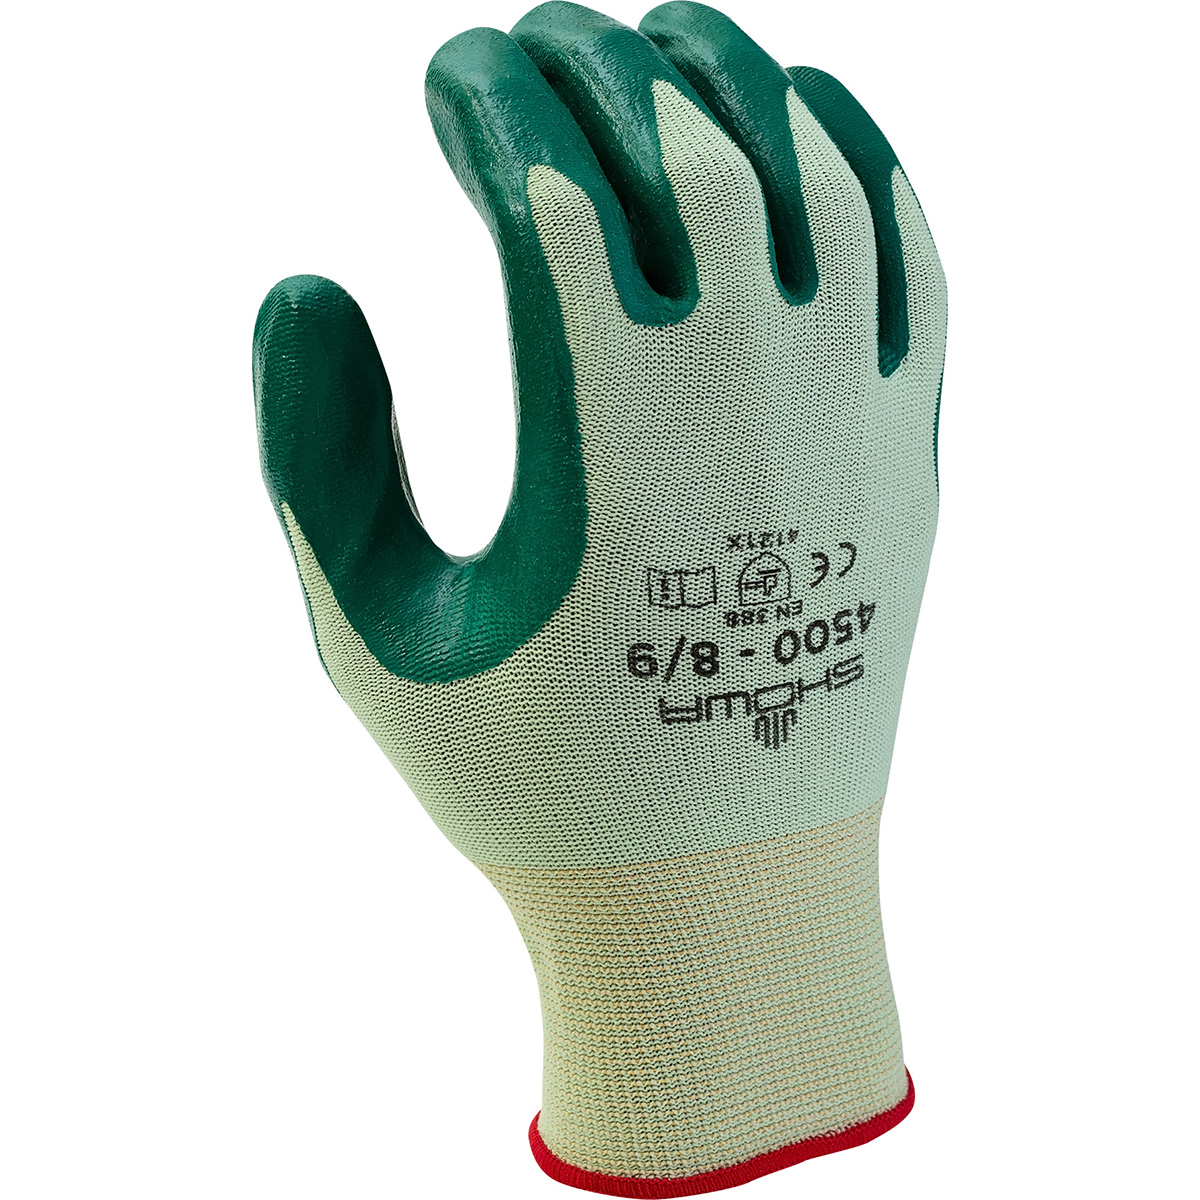 General purpose, nitrile-coated palm-dipped, light green w/green dip, nylon seamless shell, extra small